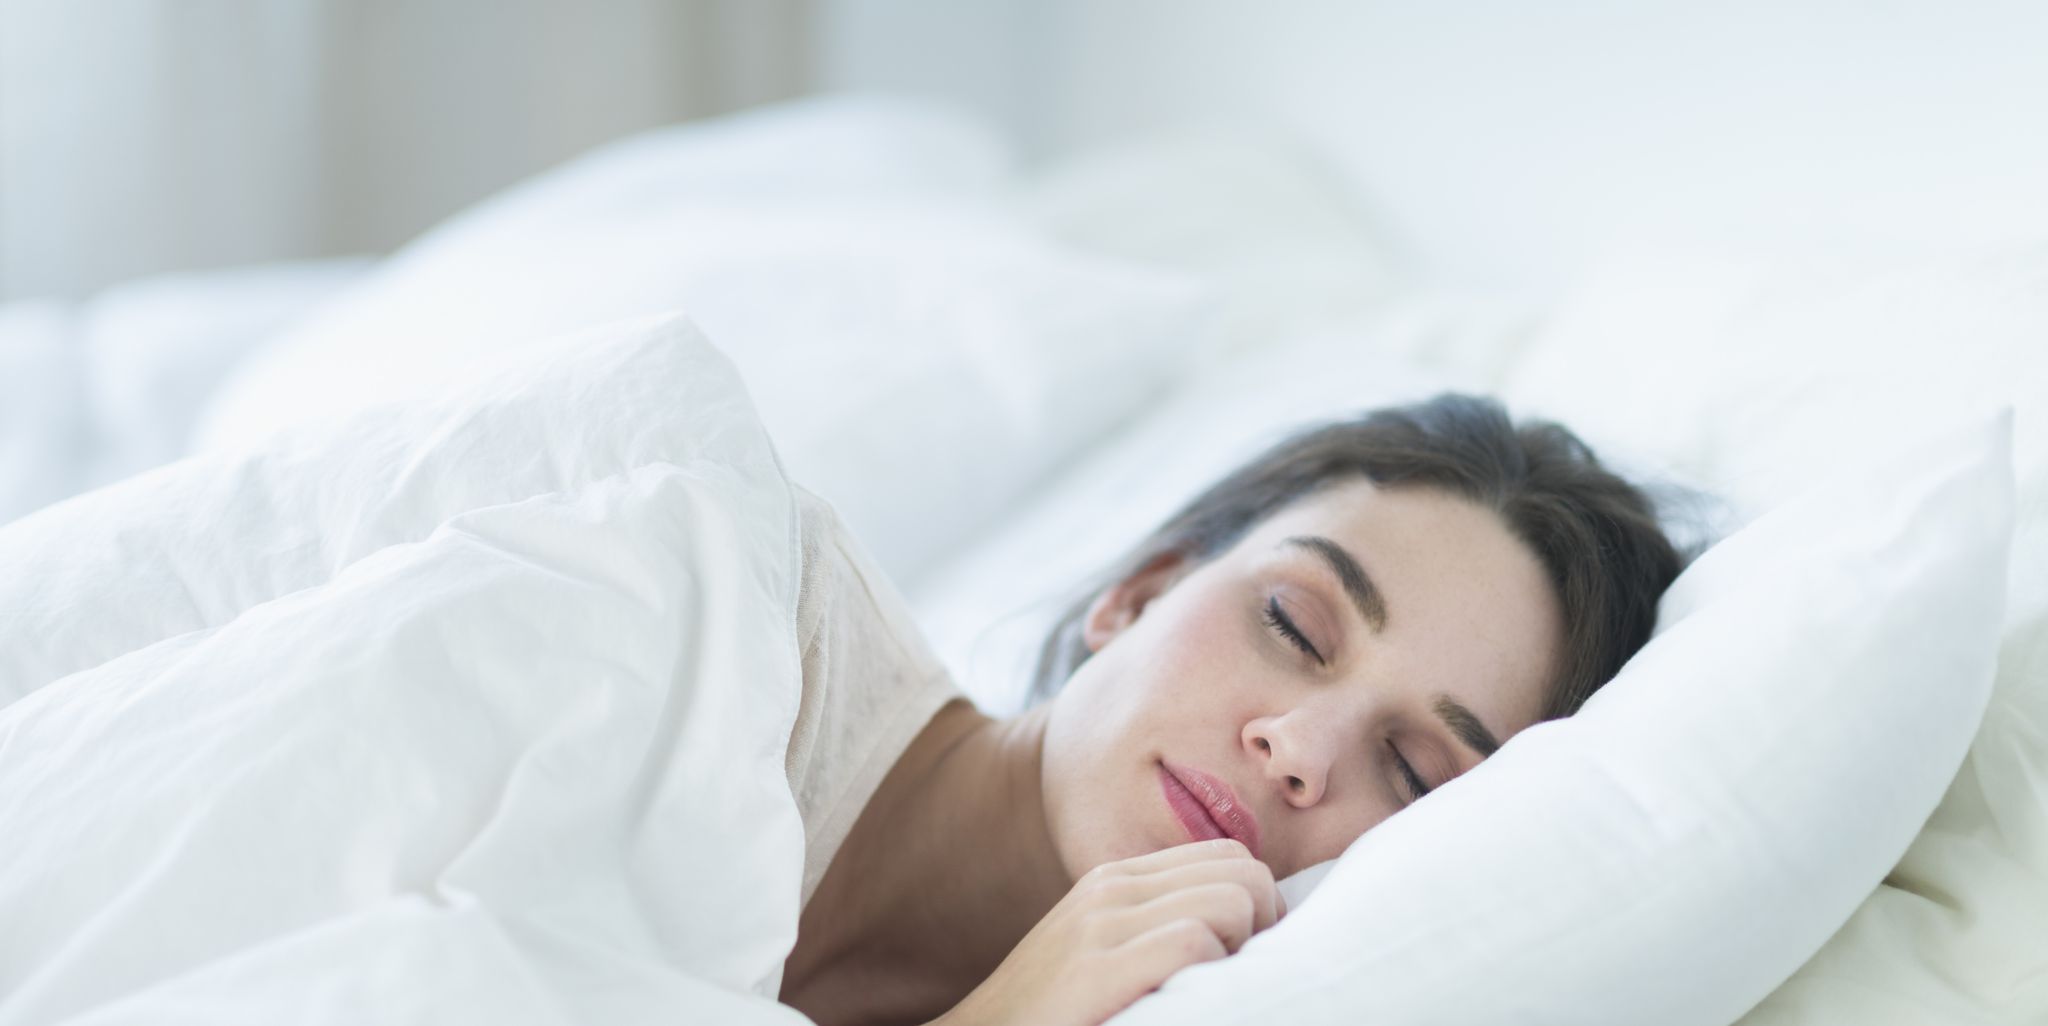 Why Brits Are Sleeping More Now Compared To 40 Years Ago – Sleeping Habits